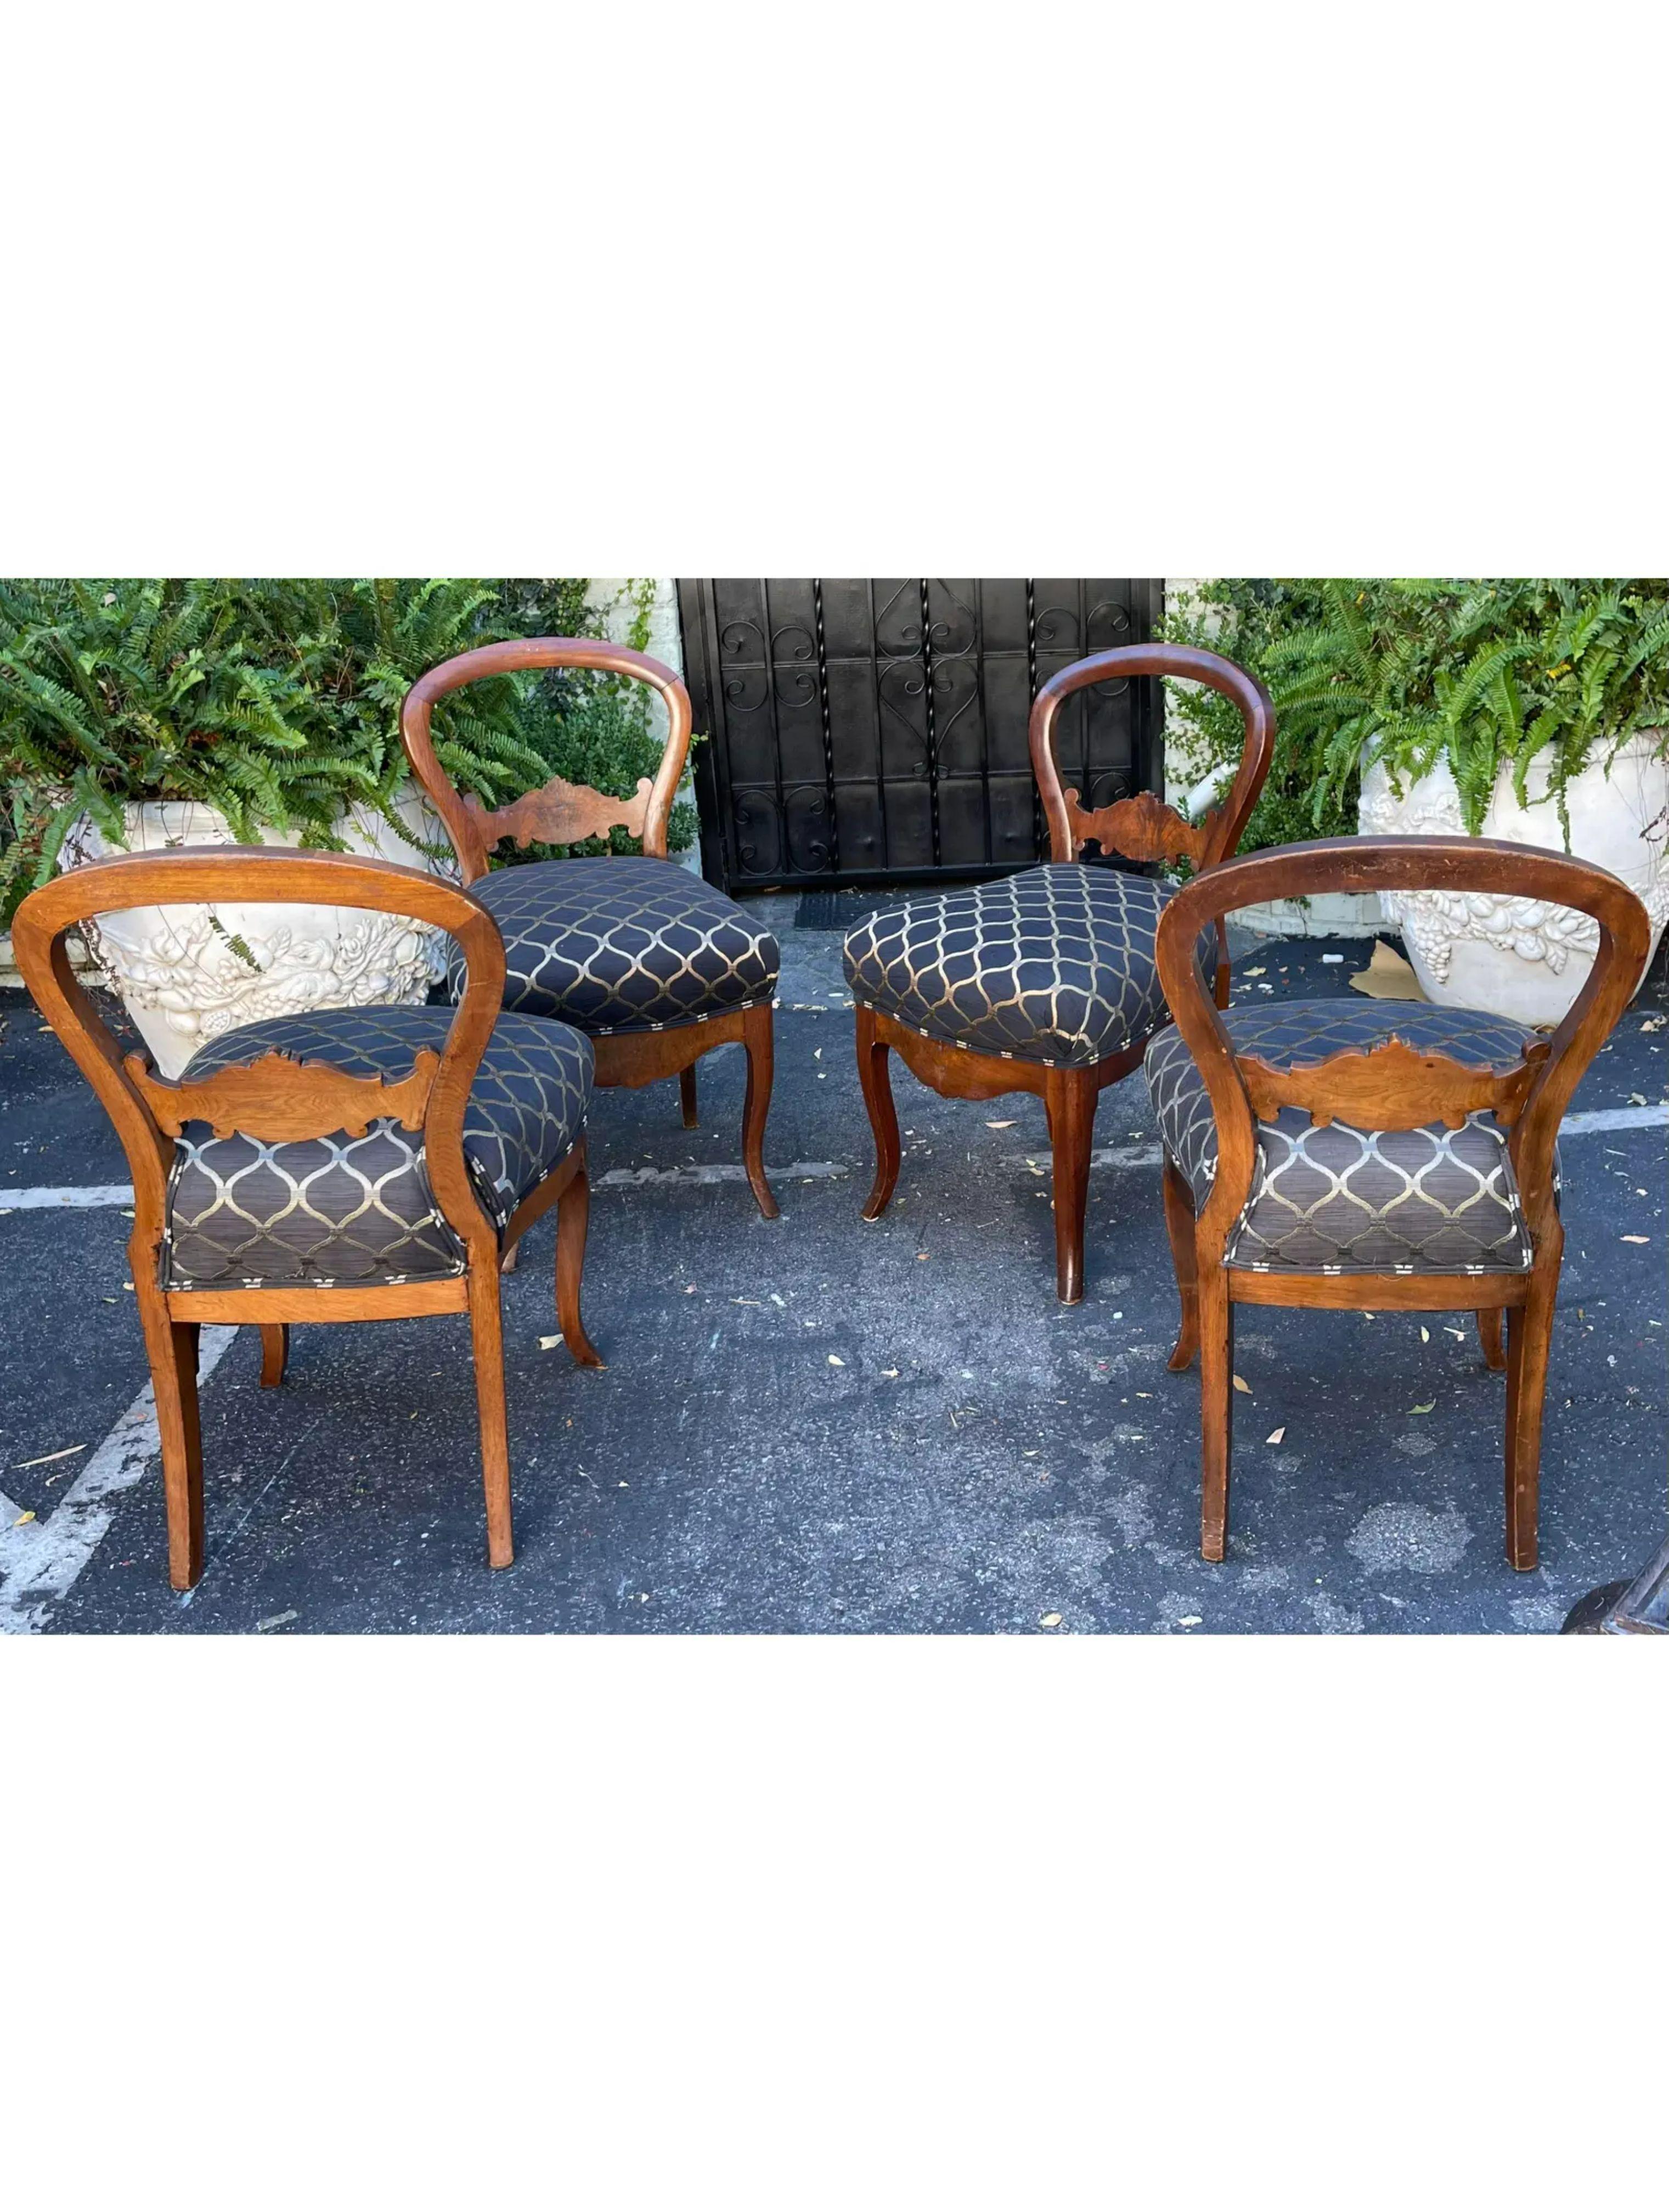 Antique Regency Period Mahogany Dining Chairs, Early 19th Century For Sale 1